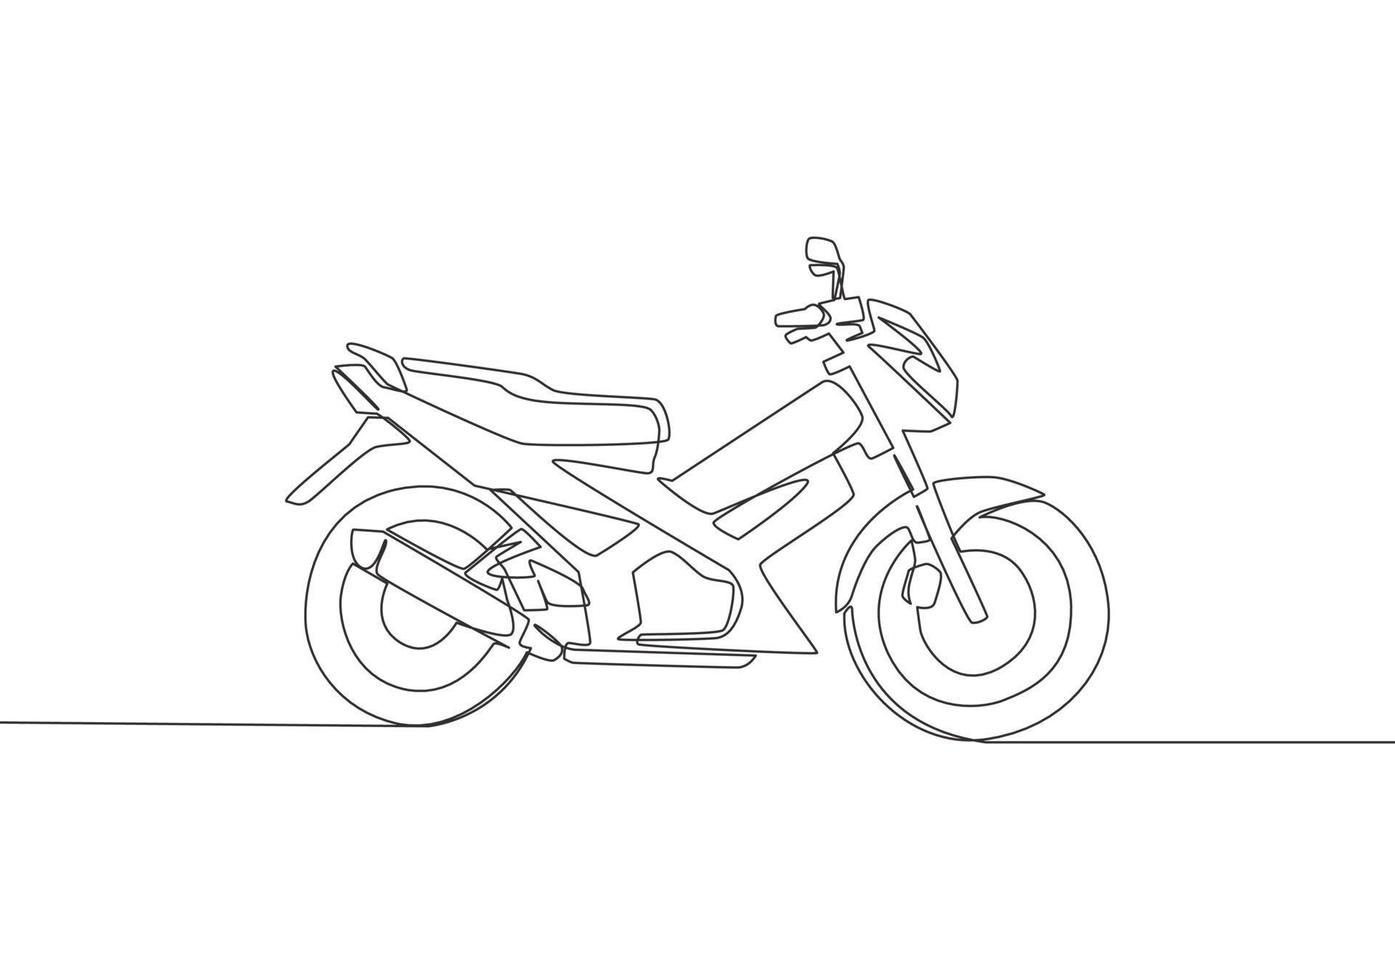 One single line drawing of Asian underbone motorbike logo. Urban ride motorcycle concept. Continuous line draw design vector illustration